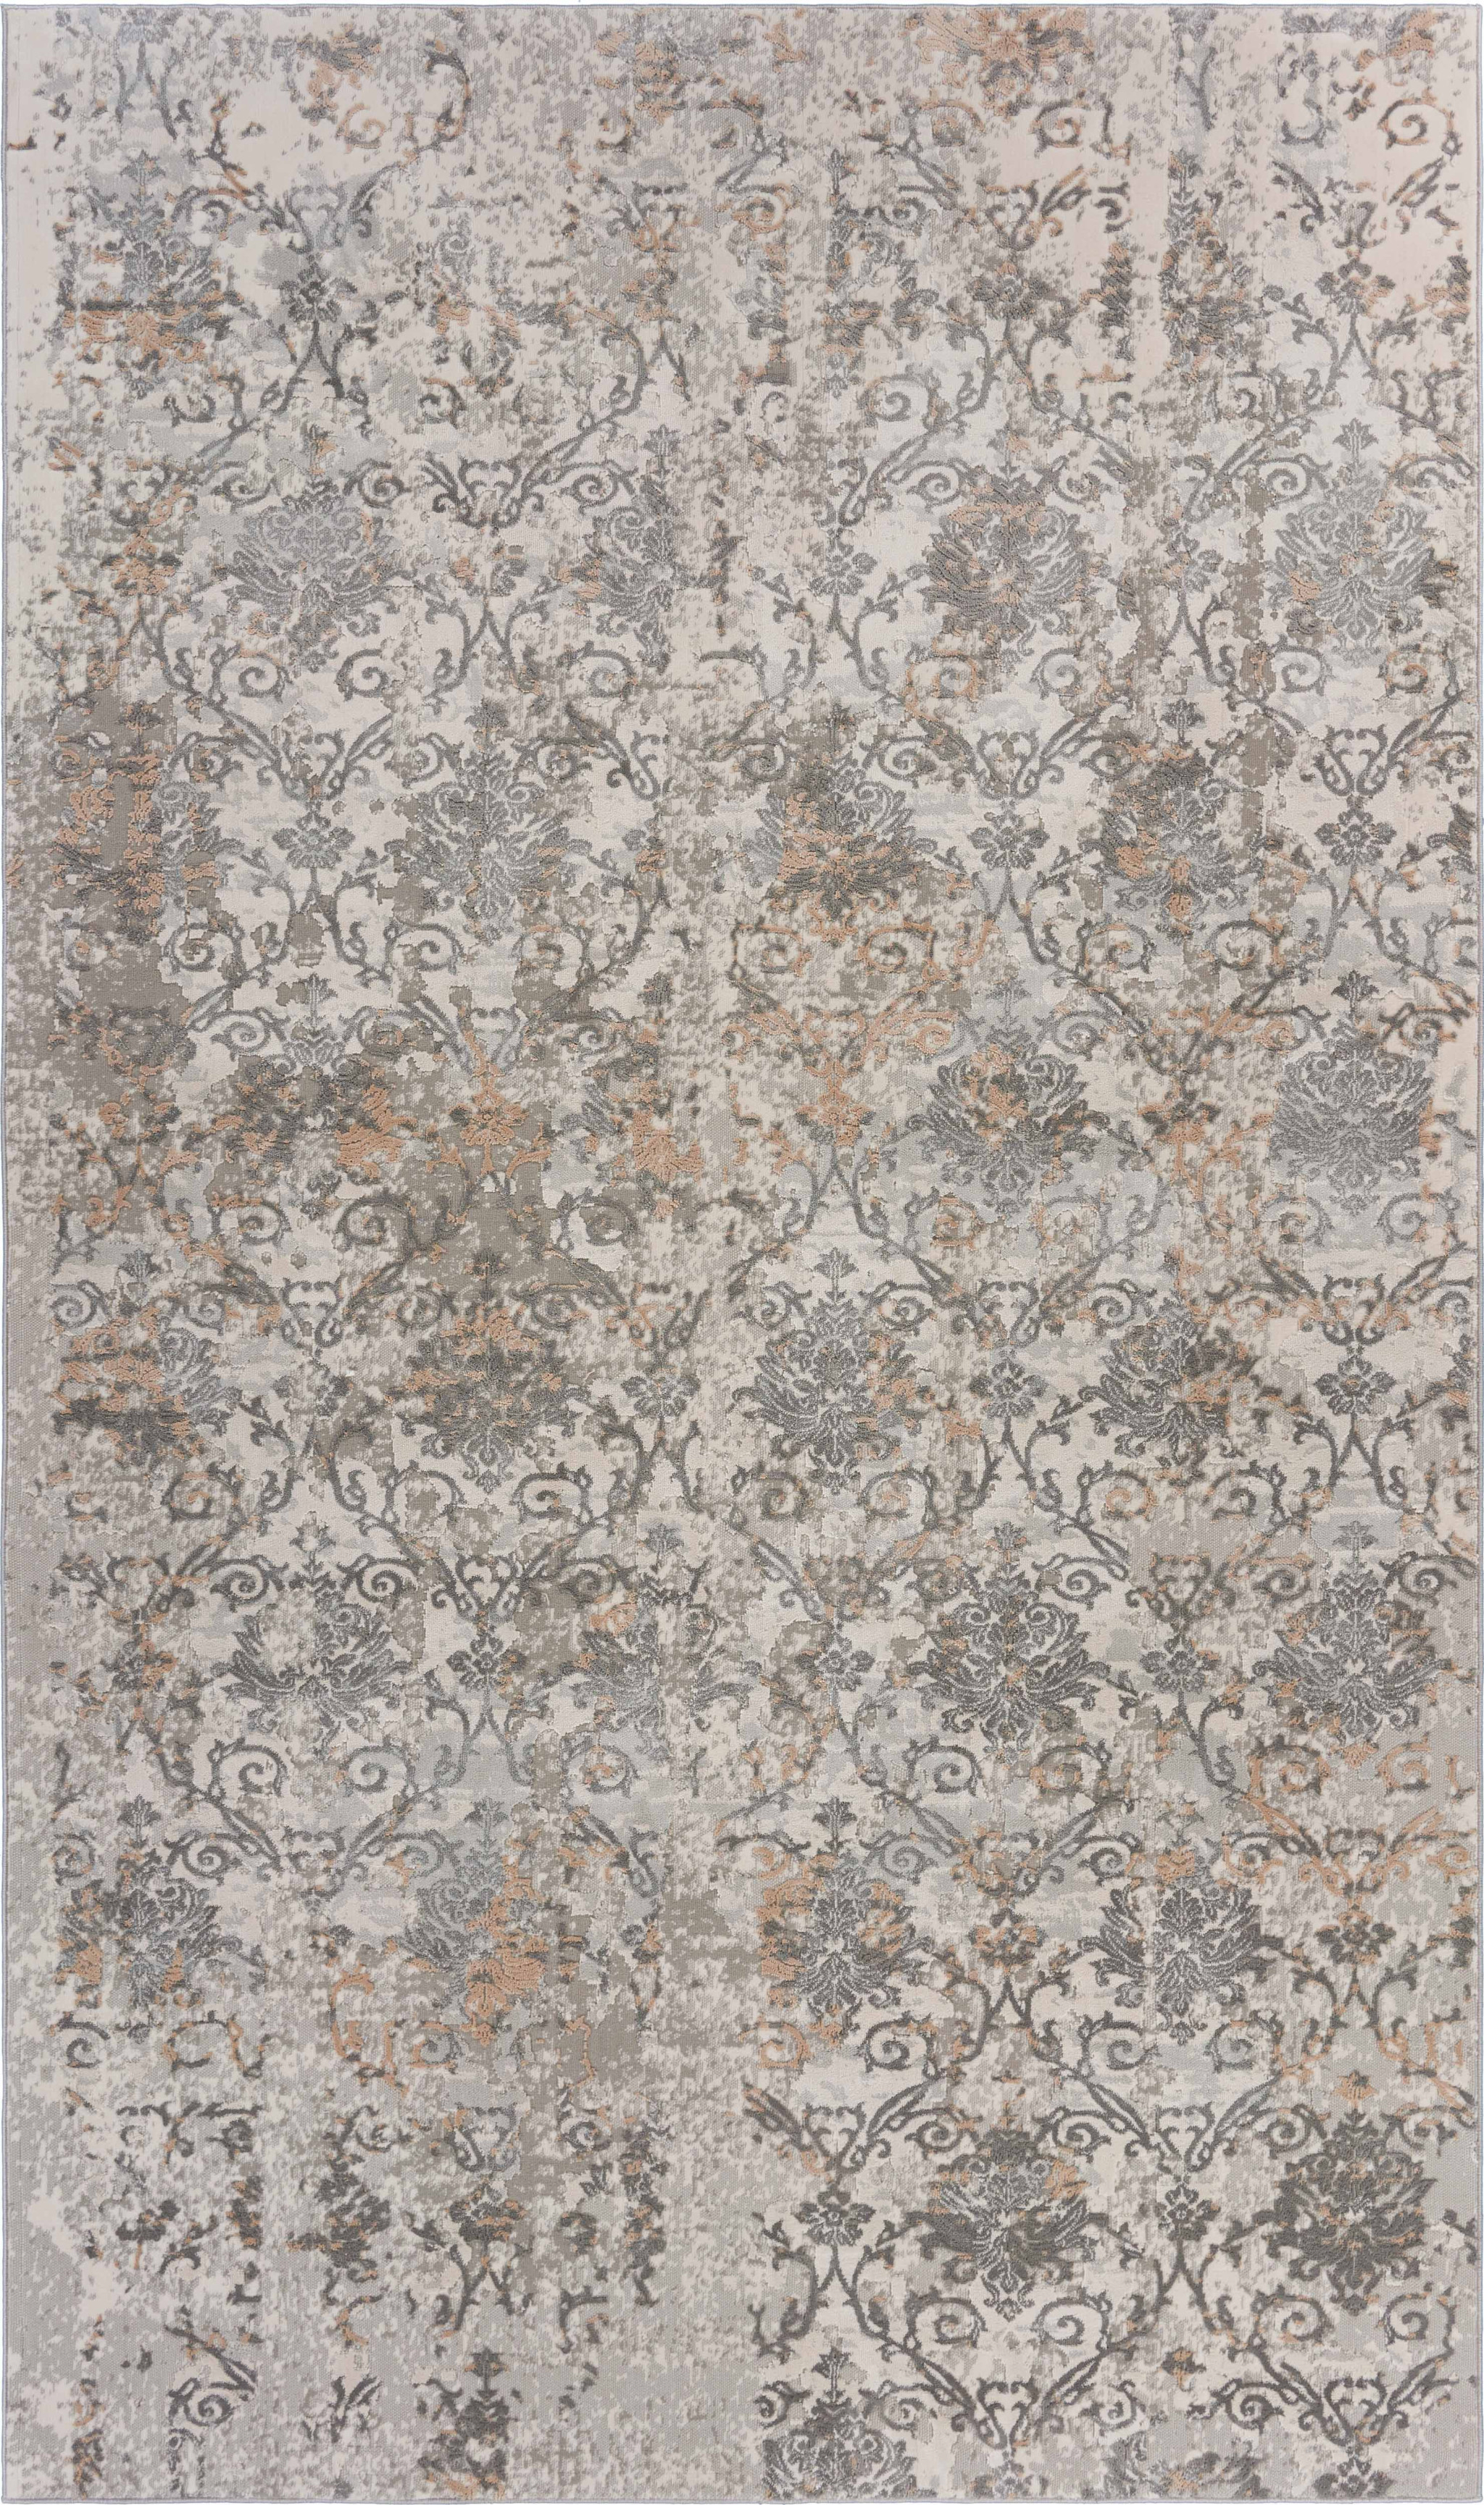 2' X 3' Cream Abstract Distressed Area Rug-516064-1